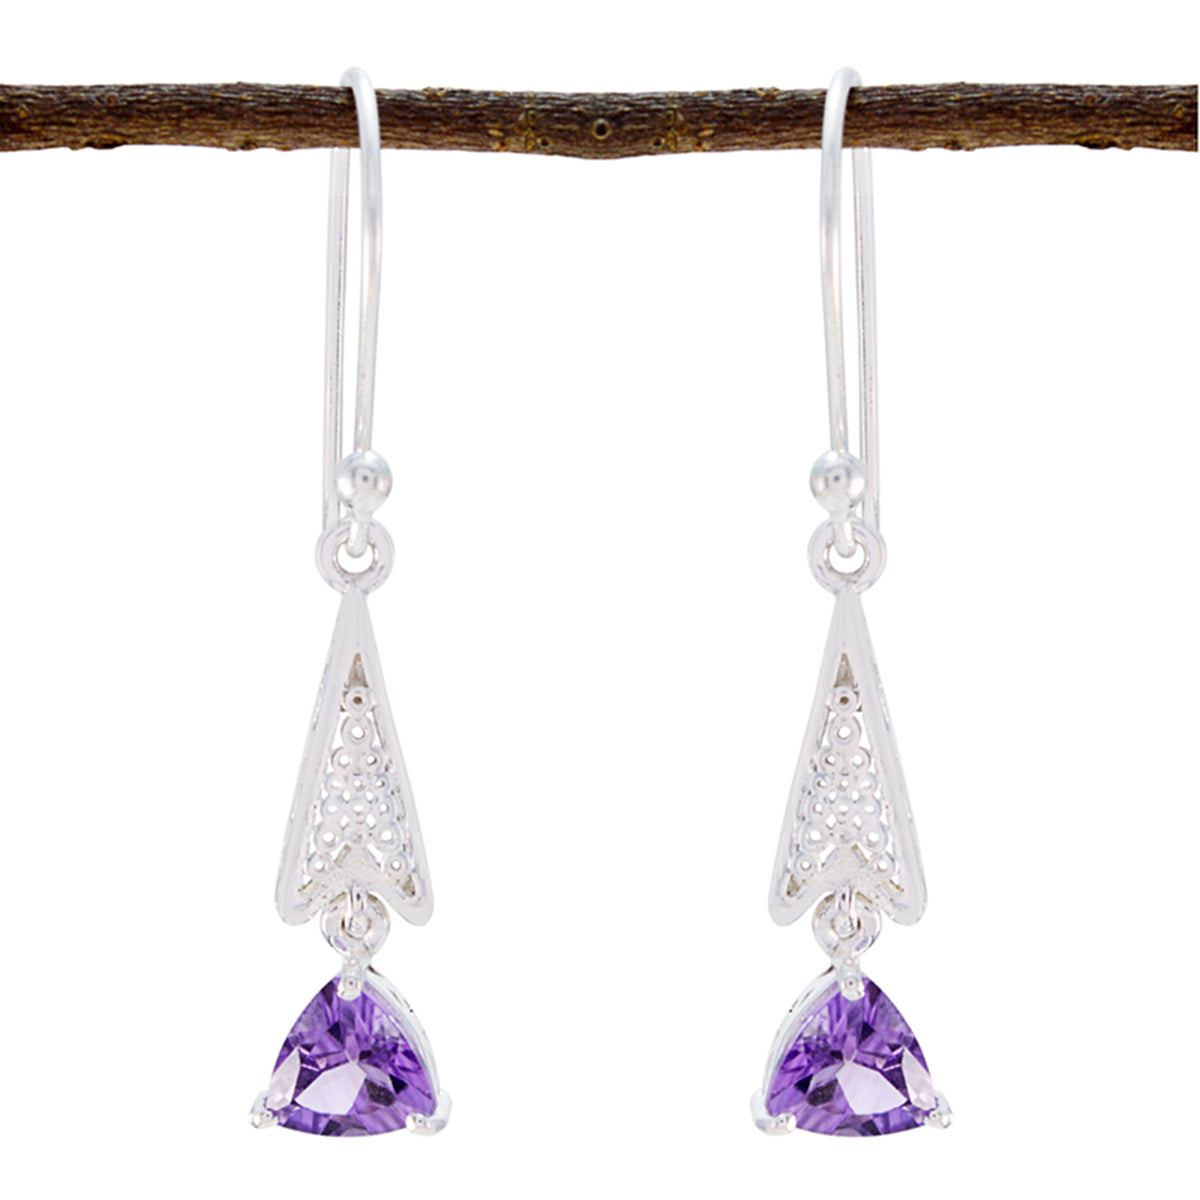 Riyo Real Gemstones Triangle Faceted Purple Amethyst Silver Earrings gift for black Friday